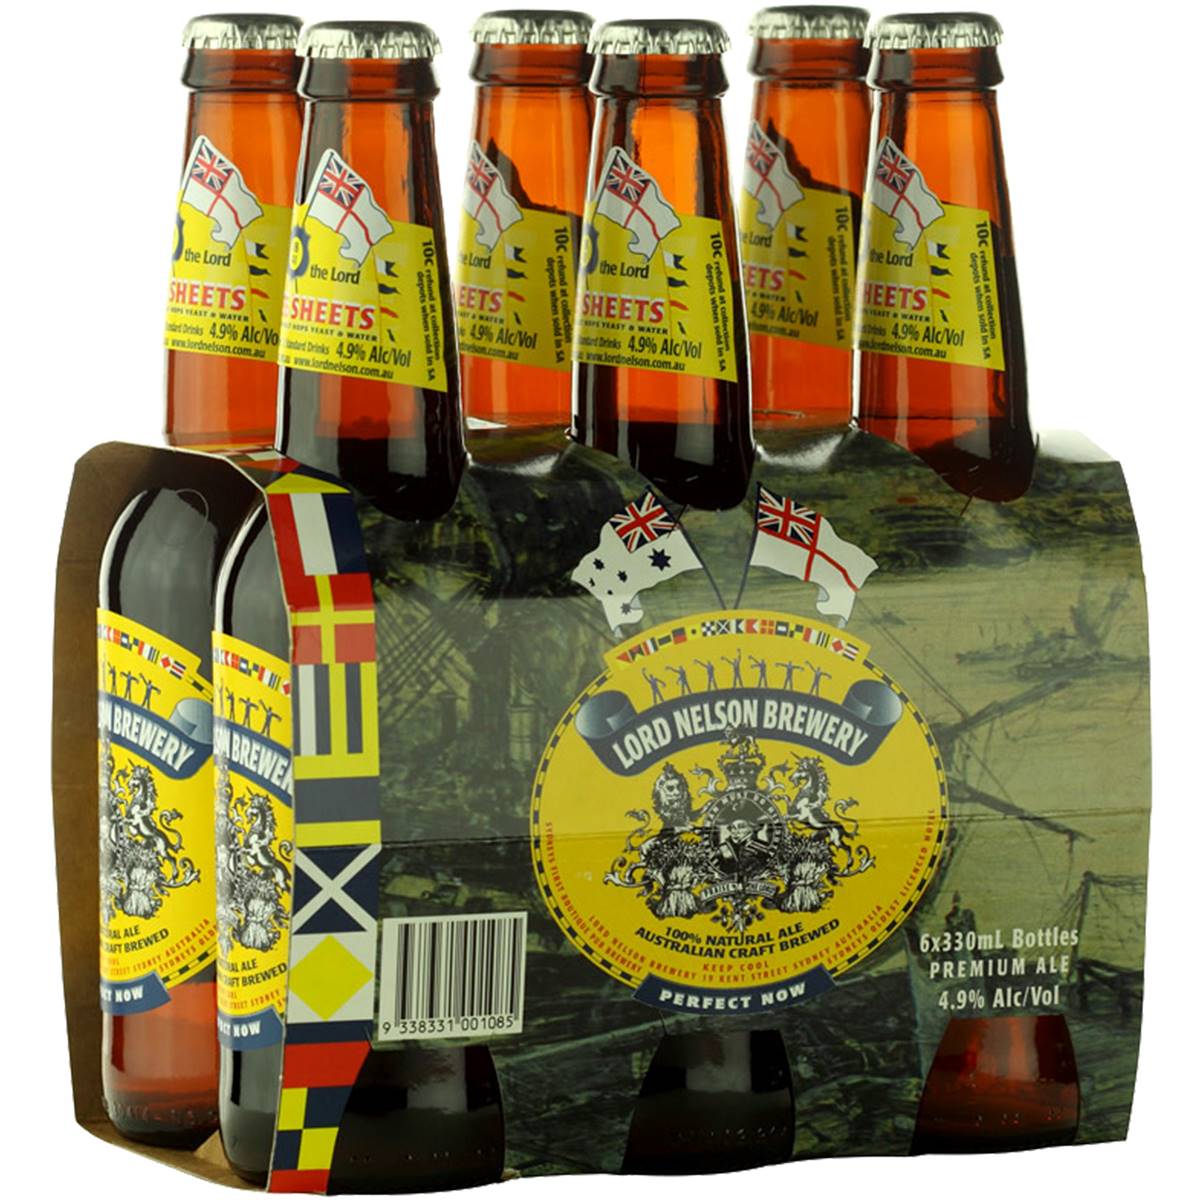 Calories in Lord Nelson Three Sheets Pale Ale Bottles